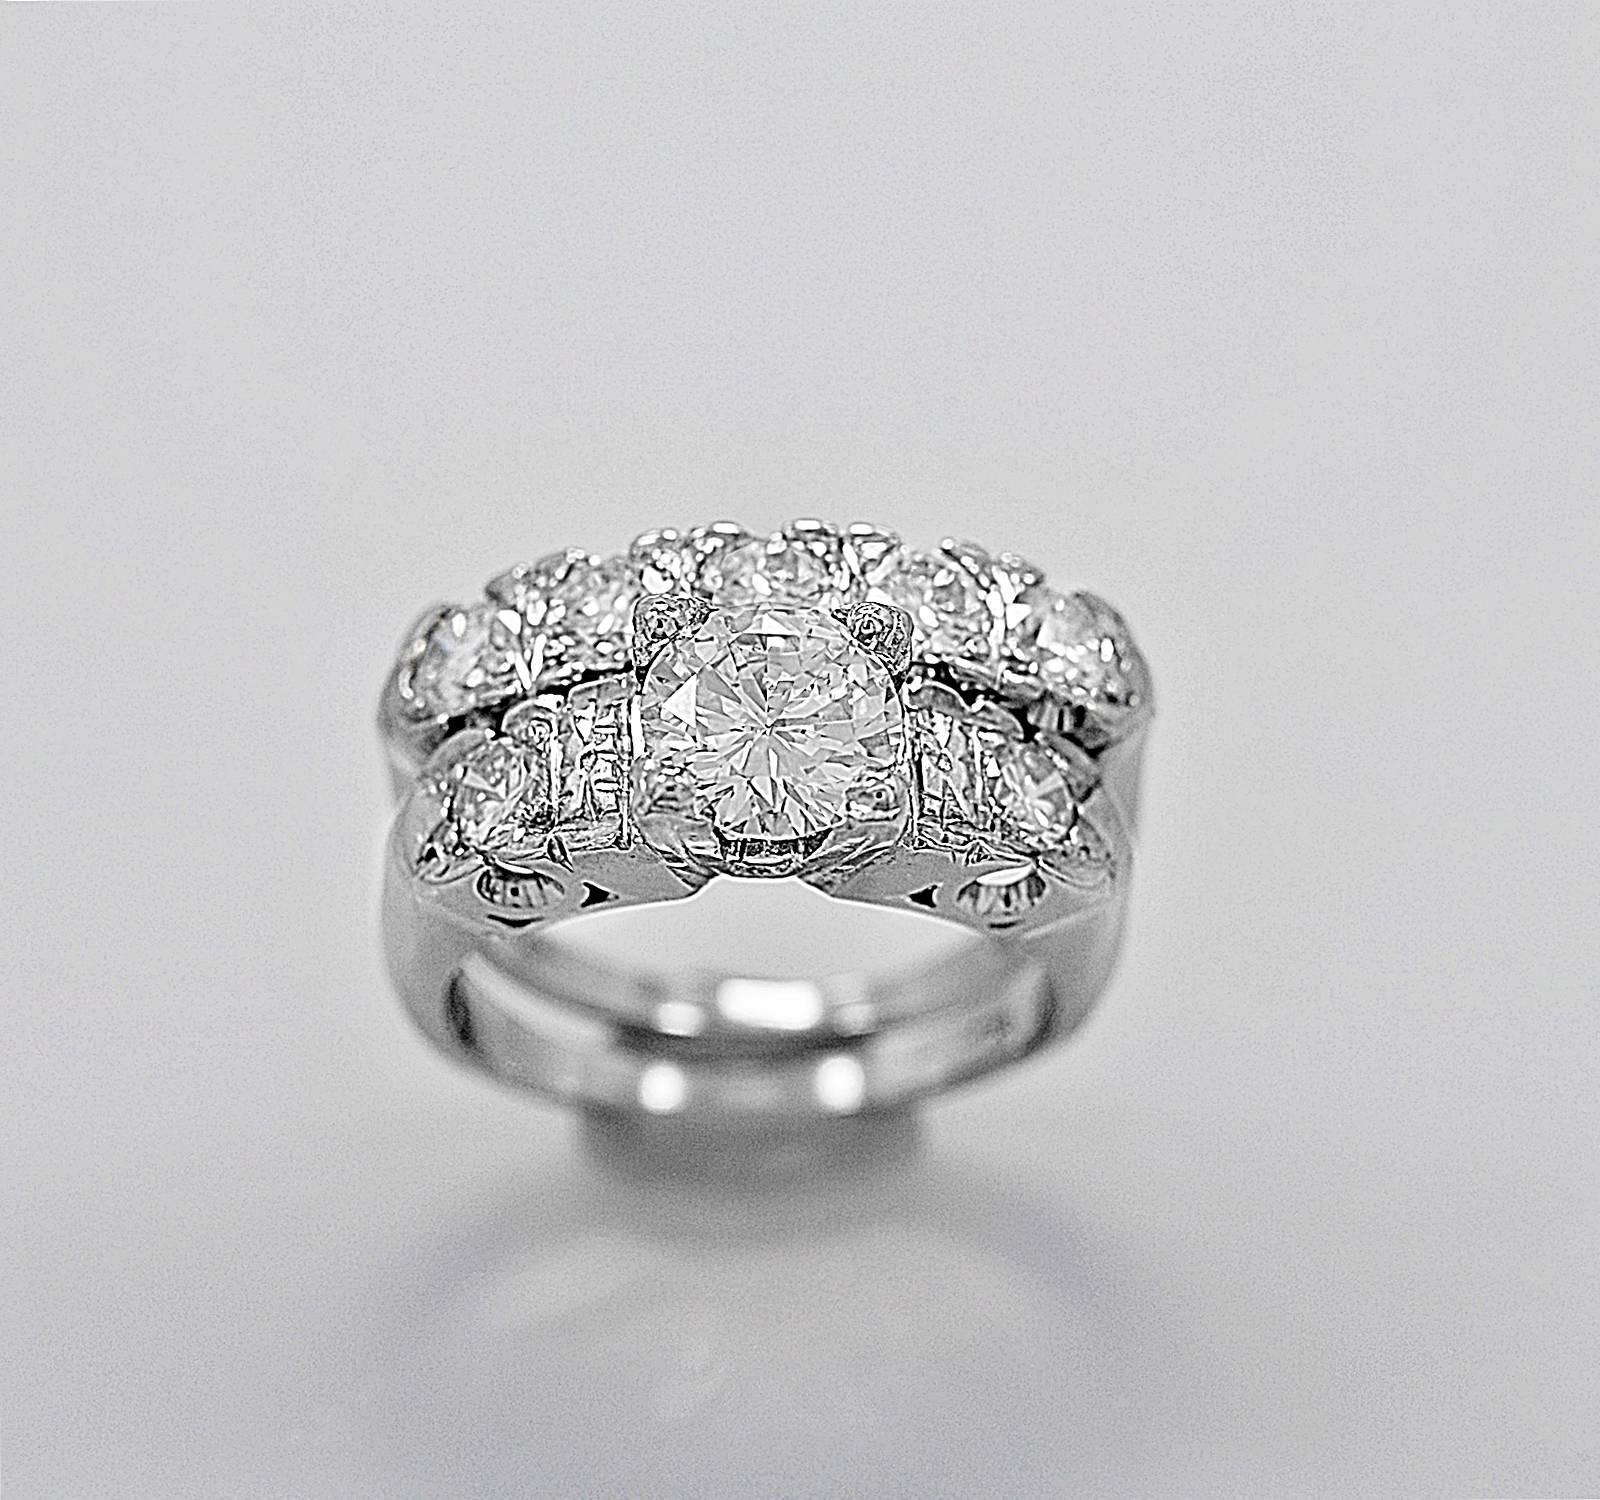 A beautiful and bold looking estate wedding set that features a 1.03ct. apx. center diamond with SI1 clarity and H color. The additional round brilliant diamonds on the mounting and wedding band weigh 1.12ct. apx. T.W. with VS1-VS2 clarity and G-H